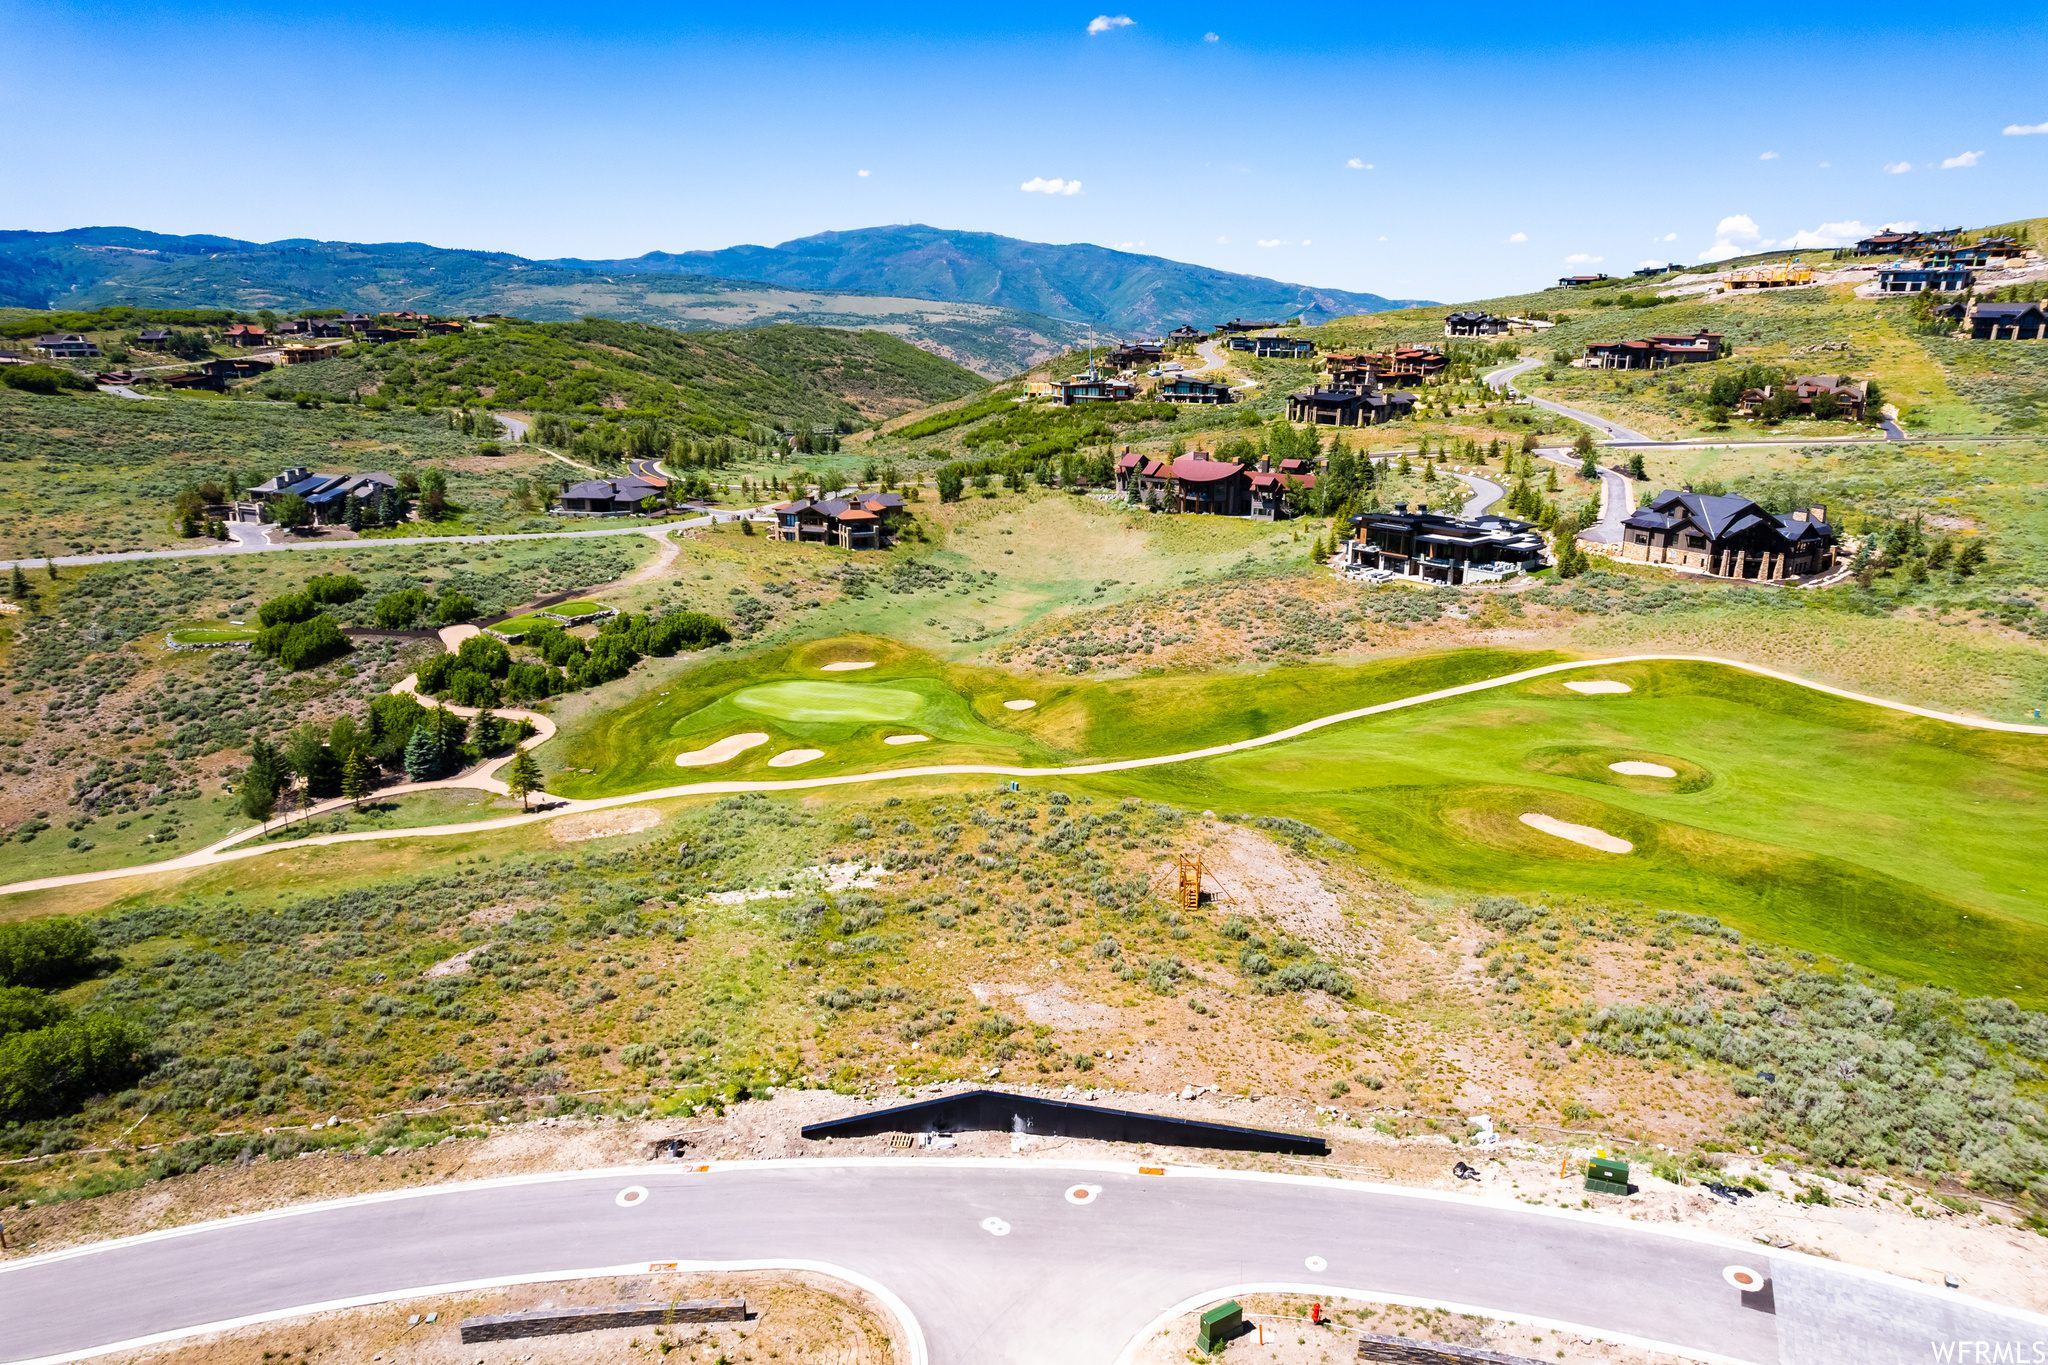 3204 WAPITI CANYON, Park City, Utah 84098, 5 Bedrooms Bedrooms, 22 Rooms Rooms,5 BathroomsBathrooms,Residential,For sale,WAPITI CANYON,1903647